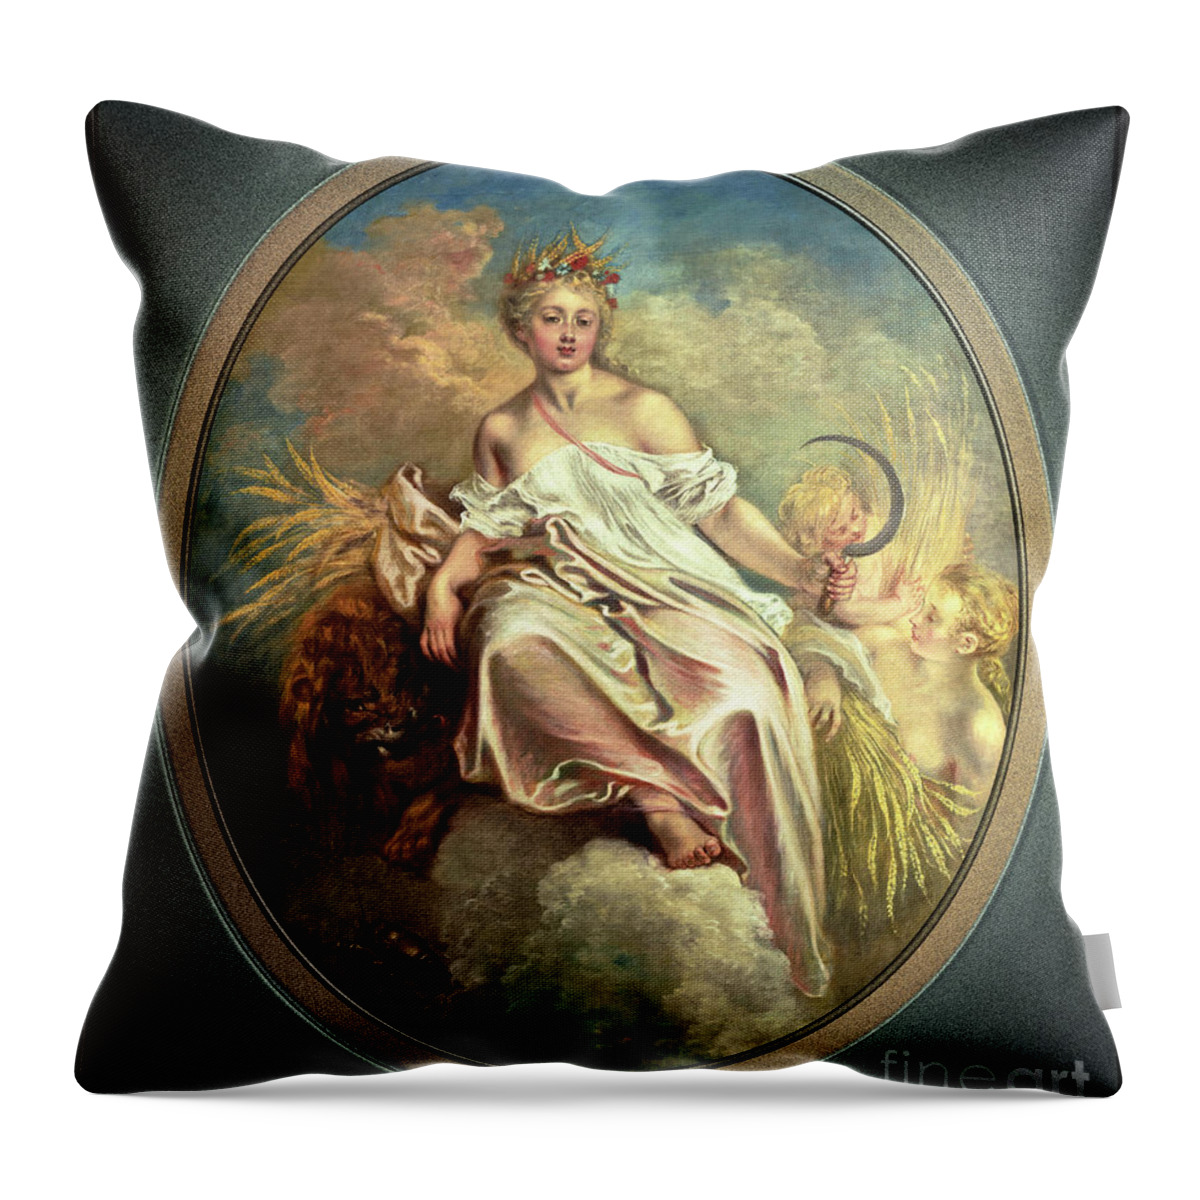 Ceres Throw Pillow featuring the painting Ceres by Antoine Watteau Old Masters Reproduction by Rolando Burbon